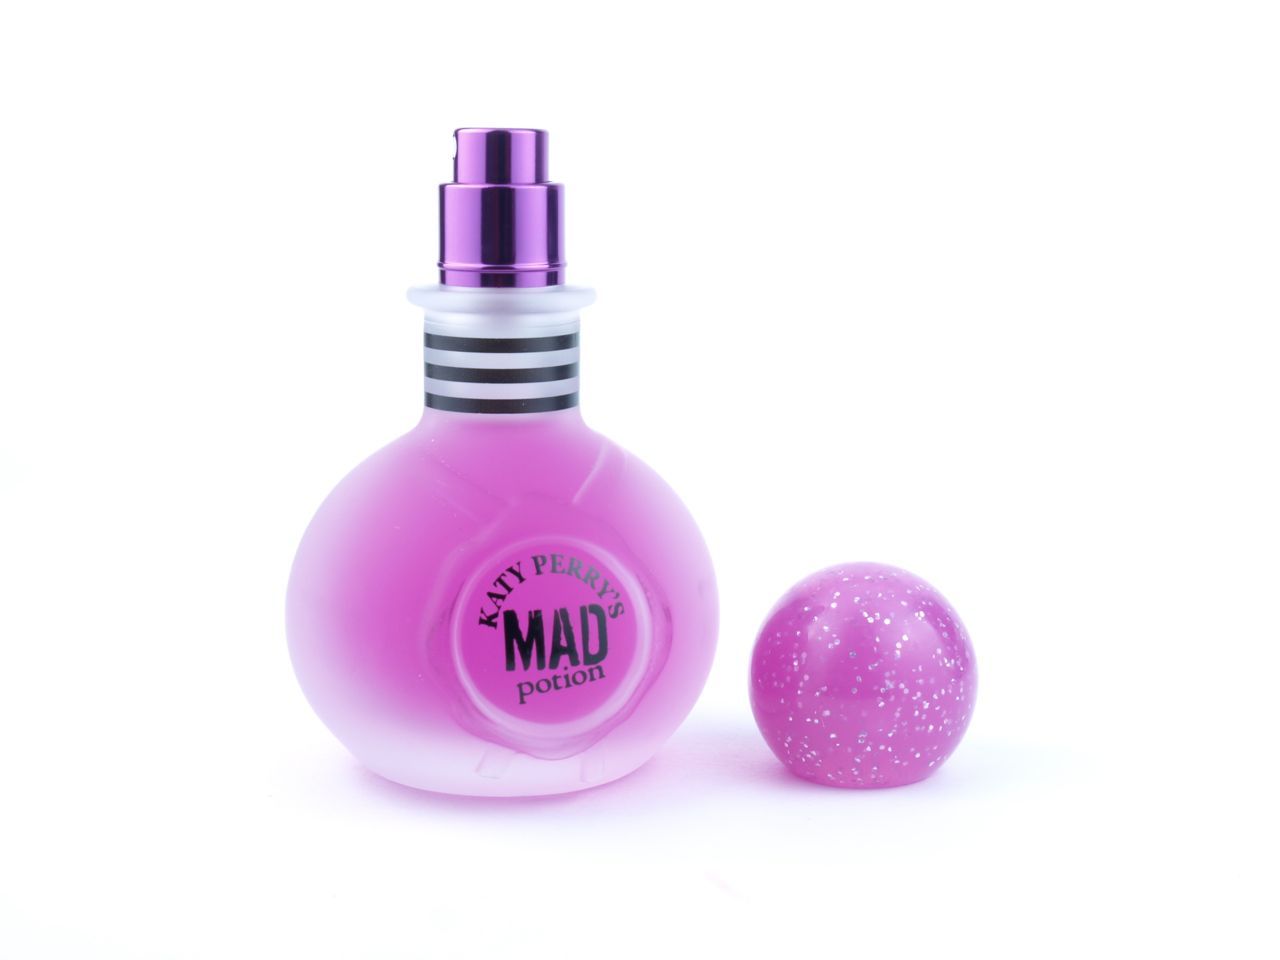 KATY PERRY KATY PERRY'S MAD POTION